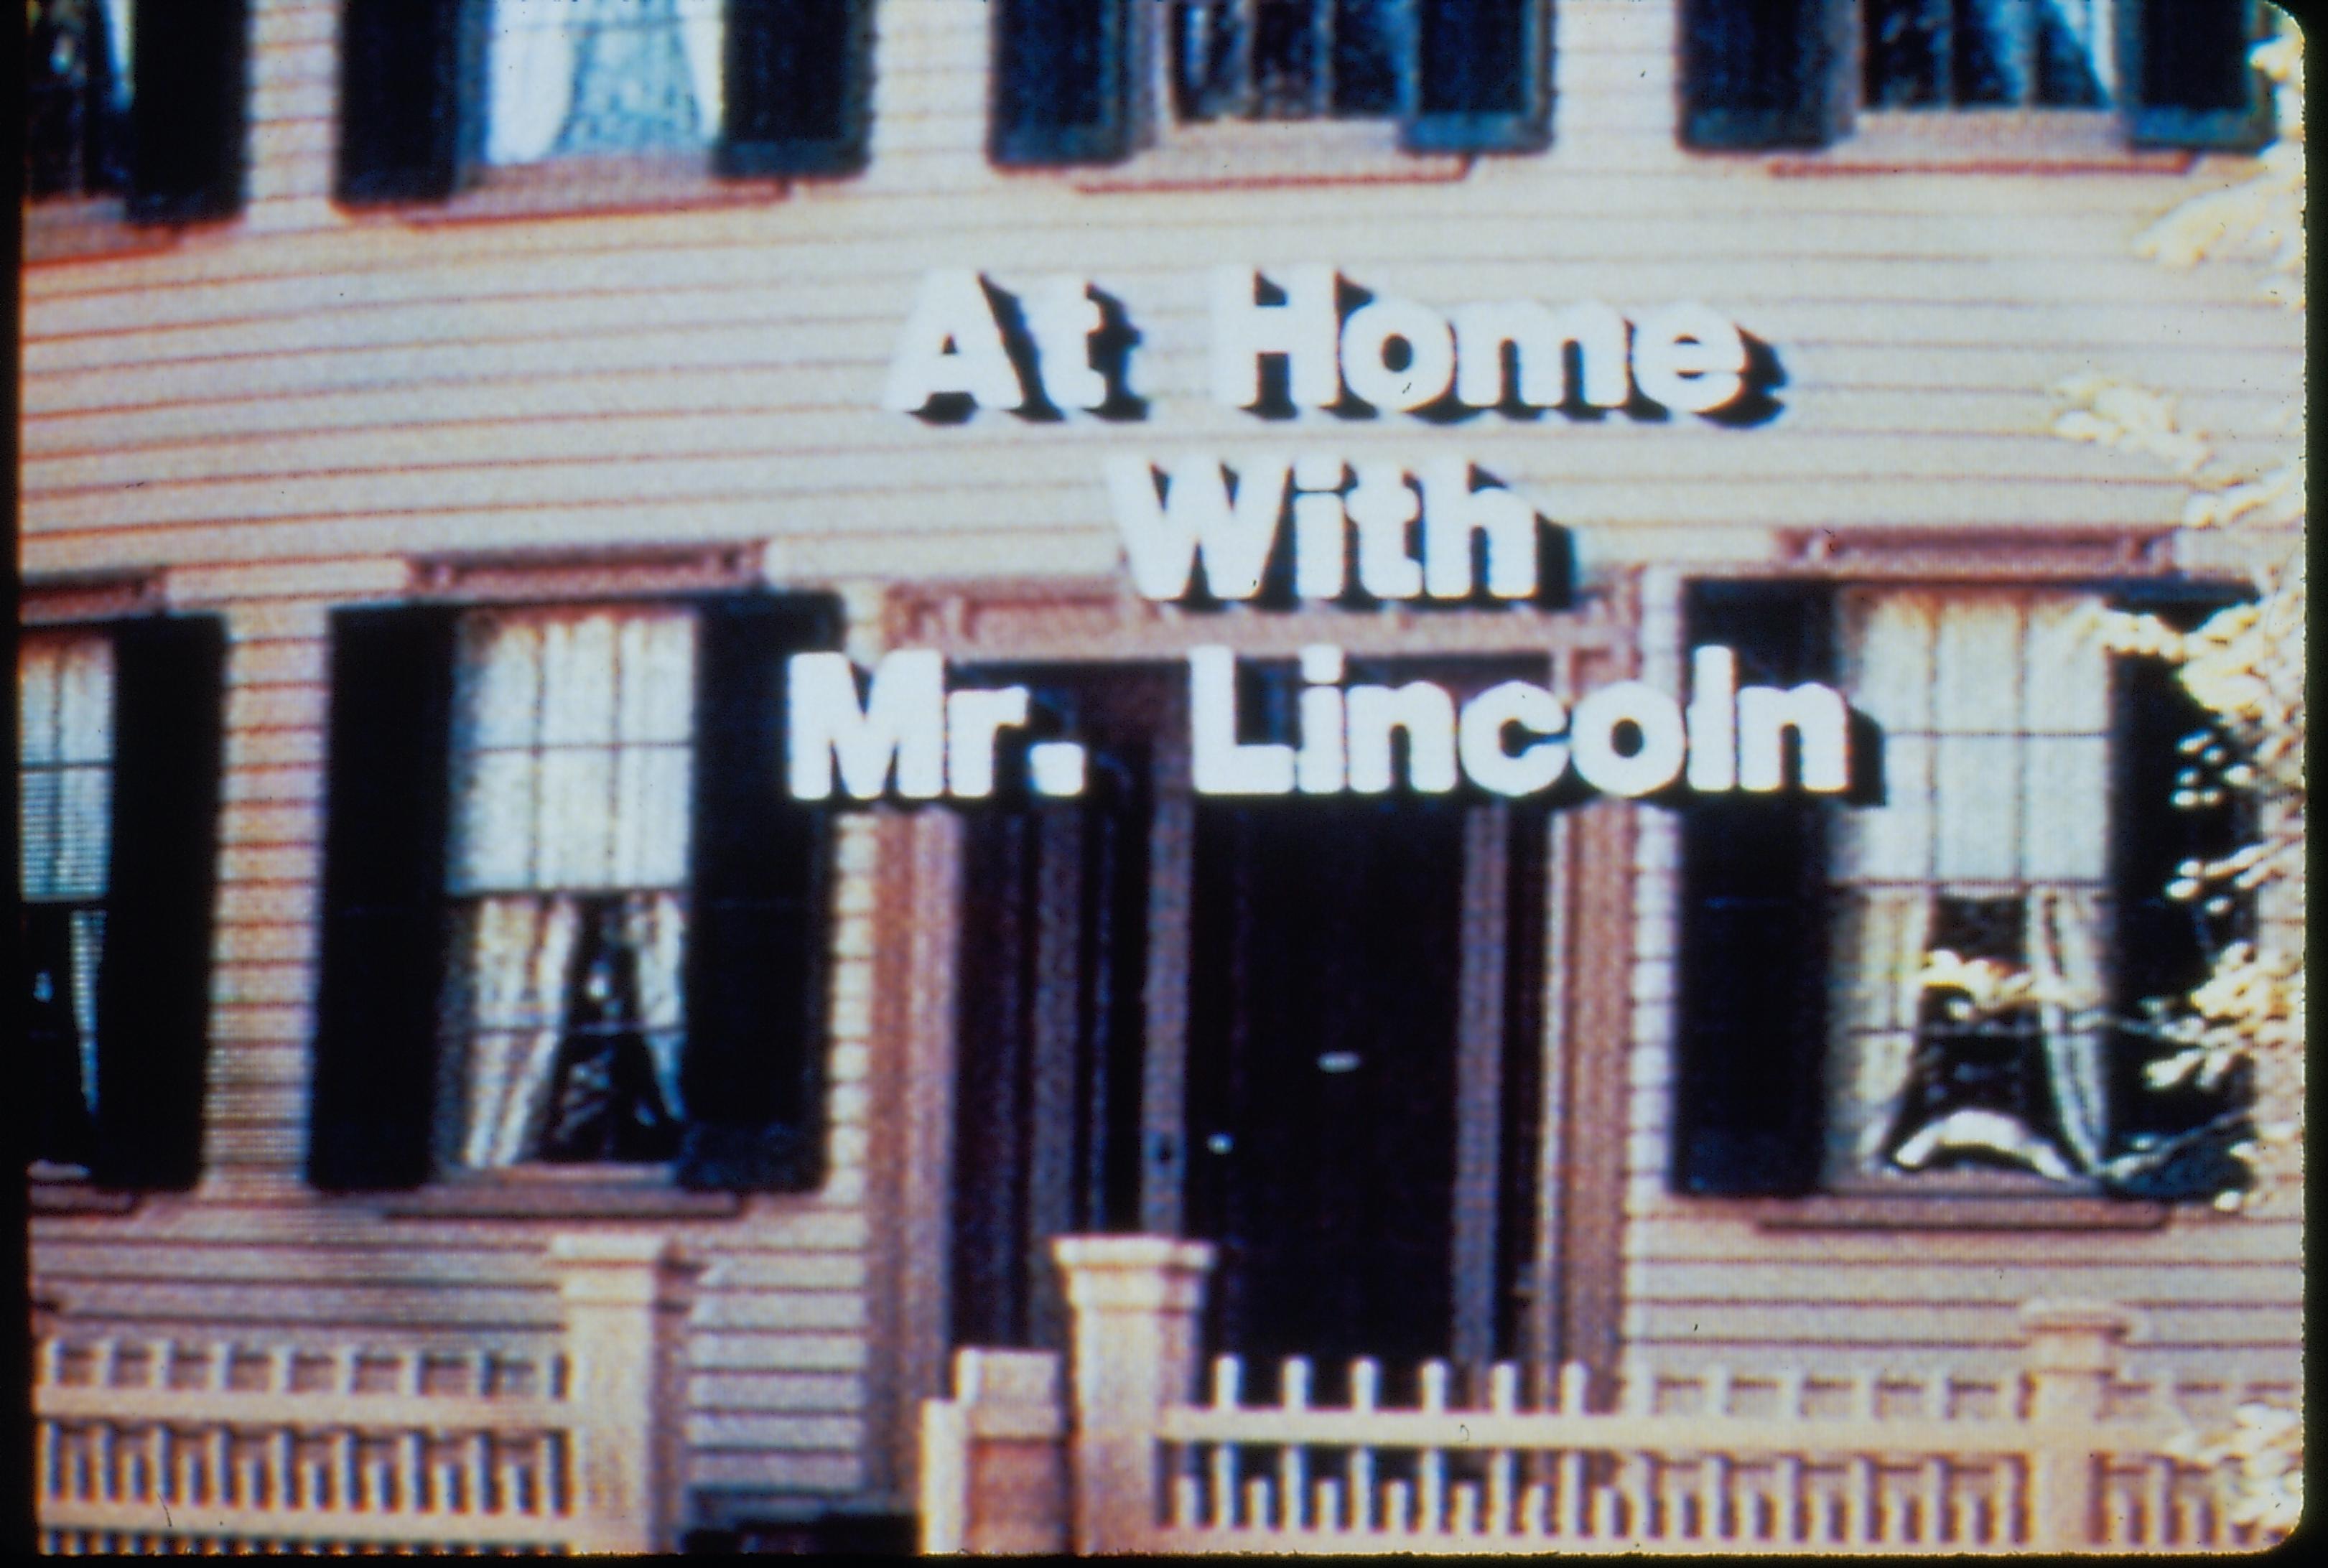 At Home with Mr. Lincoln Hearing Impaired Interpretation, Captions for the hearing impaired